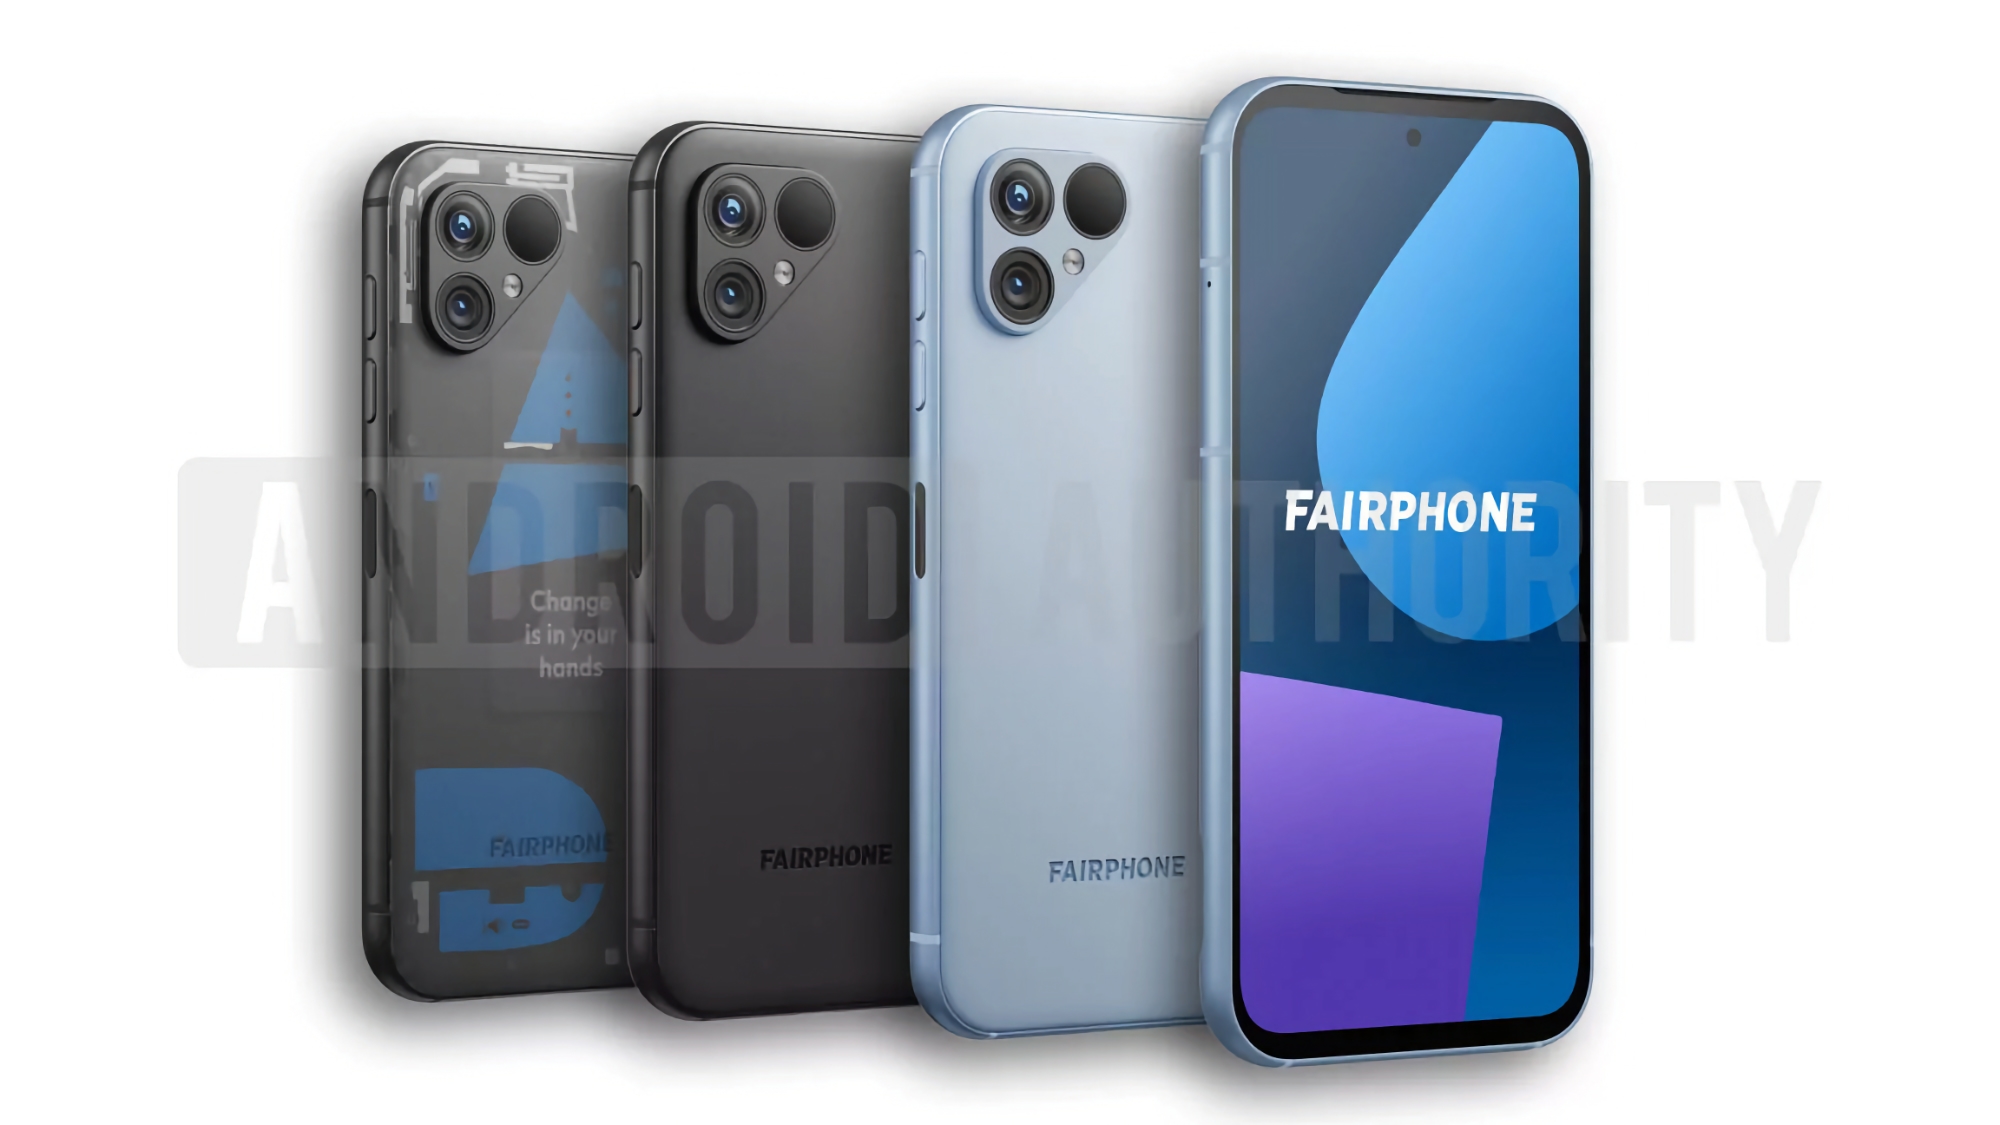 Here's what the Fairphone 5 will look like: a smartphone with five-year support, a dual camera and three colours